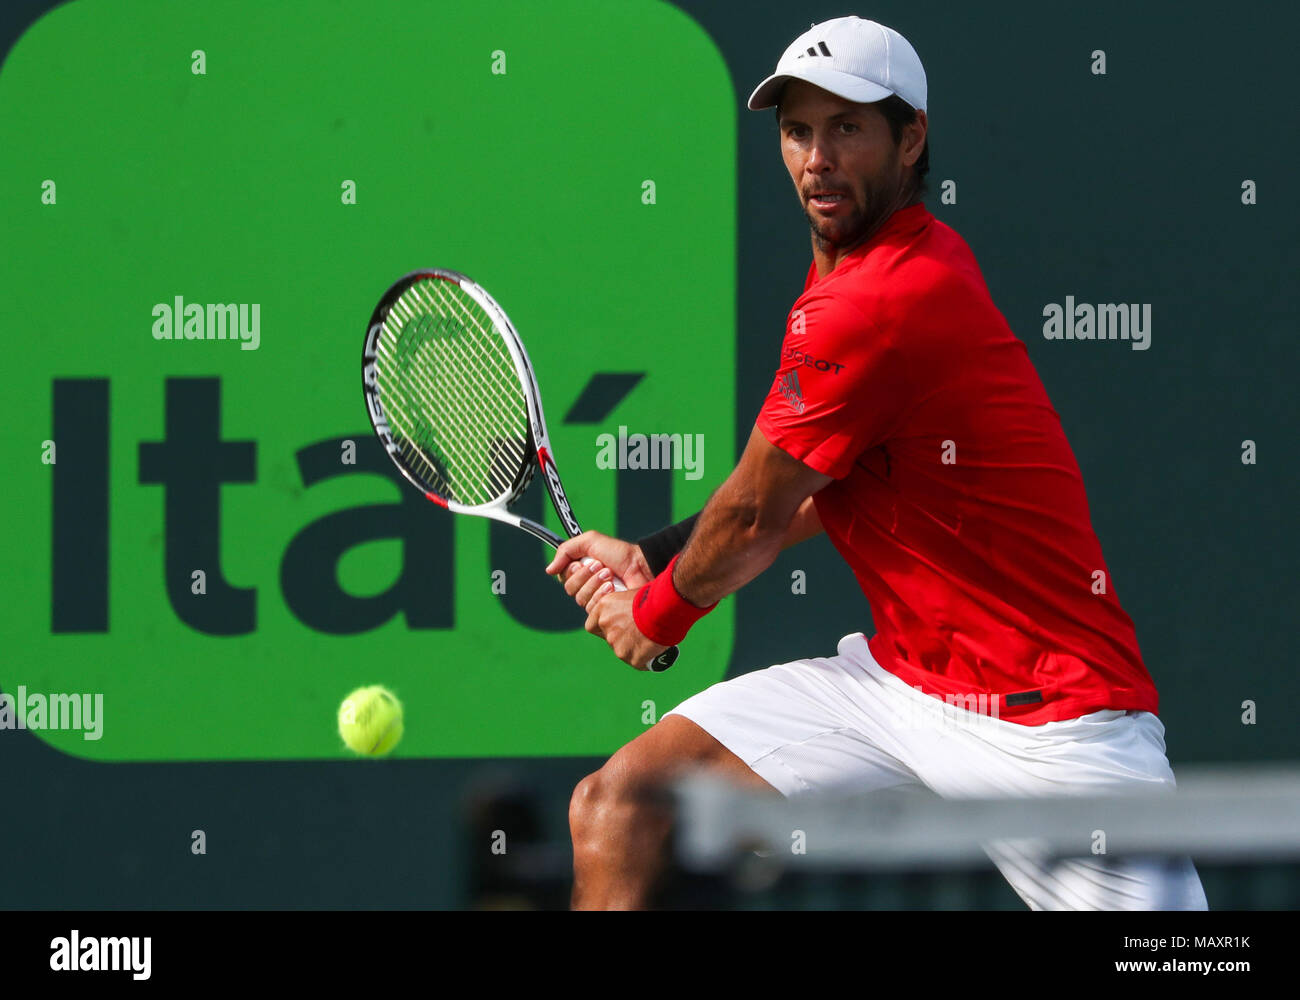 Key Biscayne, Florida, USA. 27th Mar, 2018. Fernando Verdasco of Spain plays a backhand against Pablo Carreno Busta of Spain during a fourth round match of the 2018 Miami Open presented by Itau professional tennis tournament, played at the Crandon Park Tennis Center in Key Biscayne, Florida, USA. Mario Houben/CSM/Alamy Live News Stock Photo